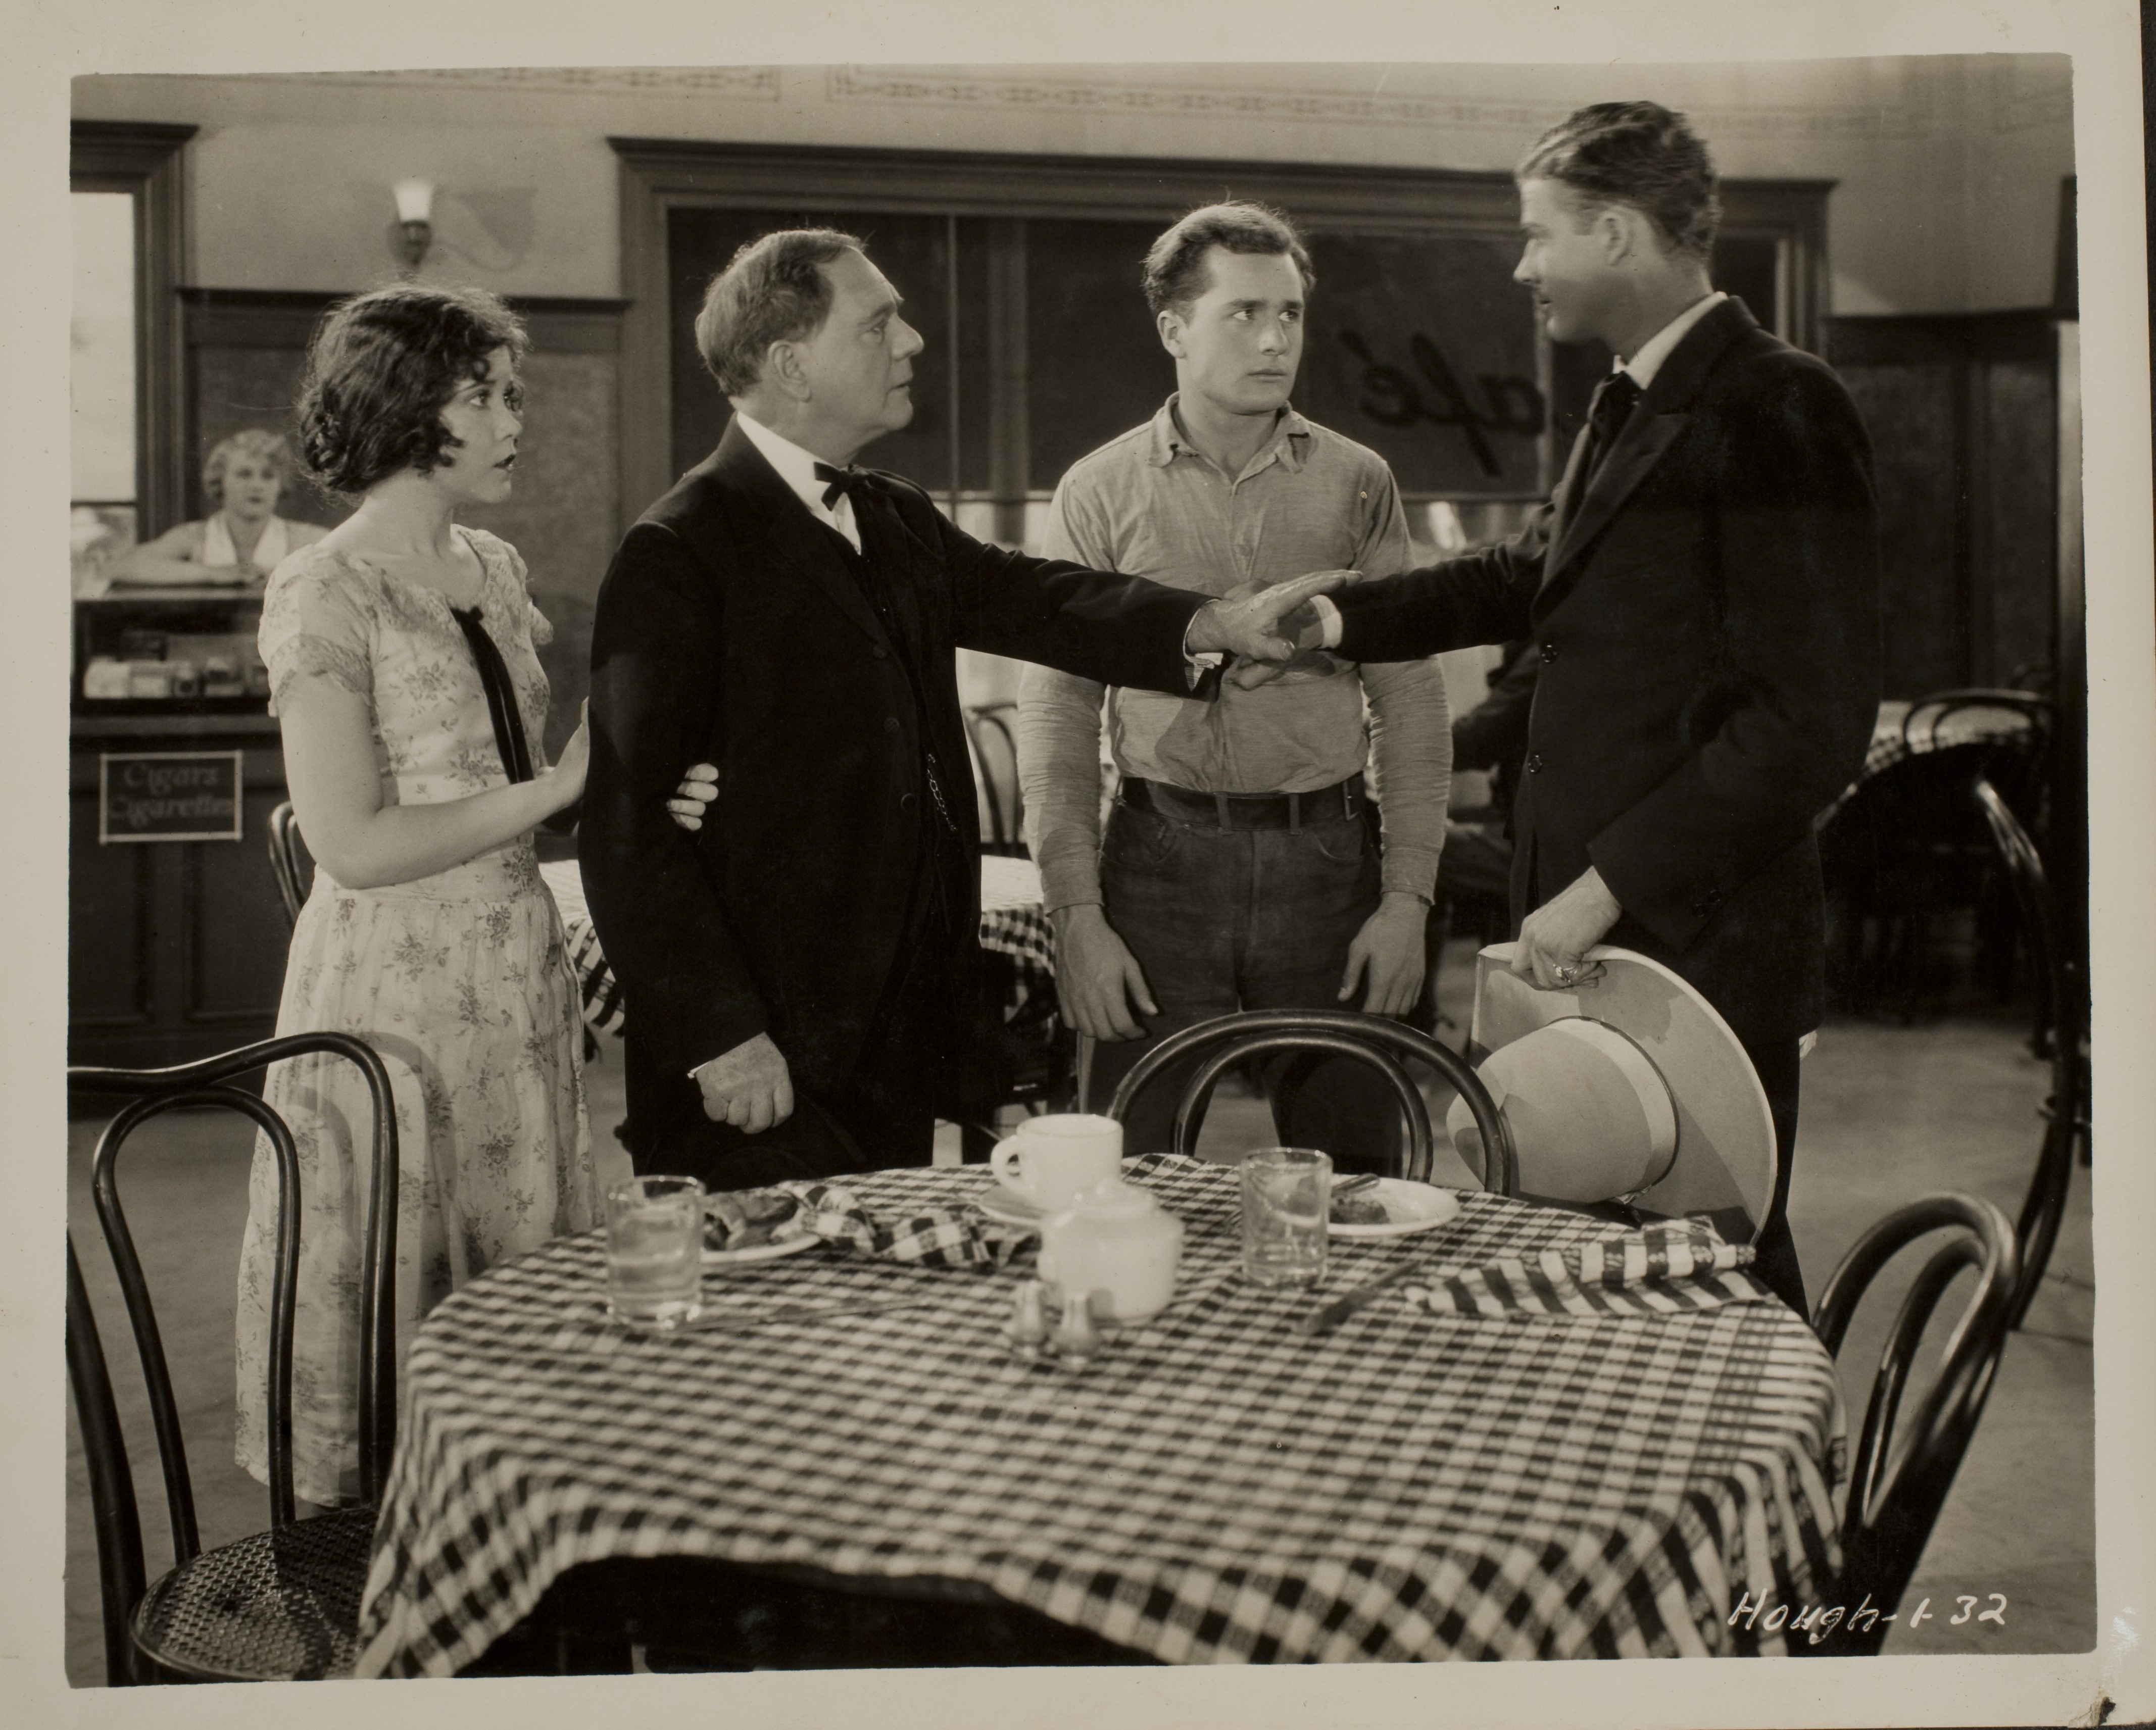 Movie still with Rex Bell (George Francis Beldam) (on right) and other unidentified people: photographic print